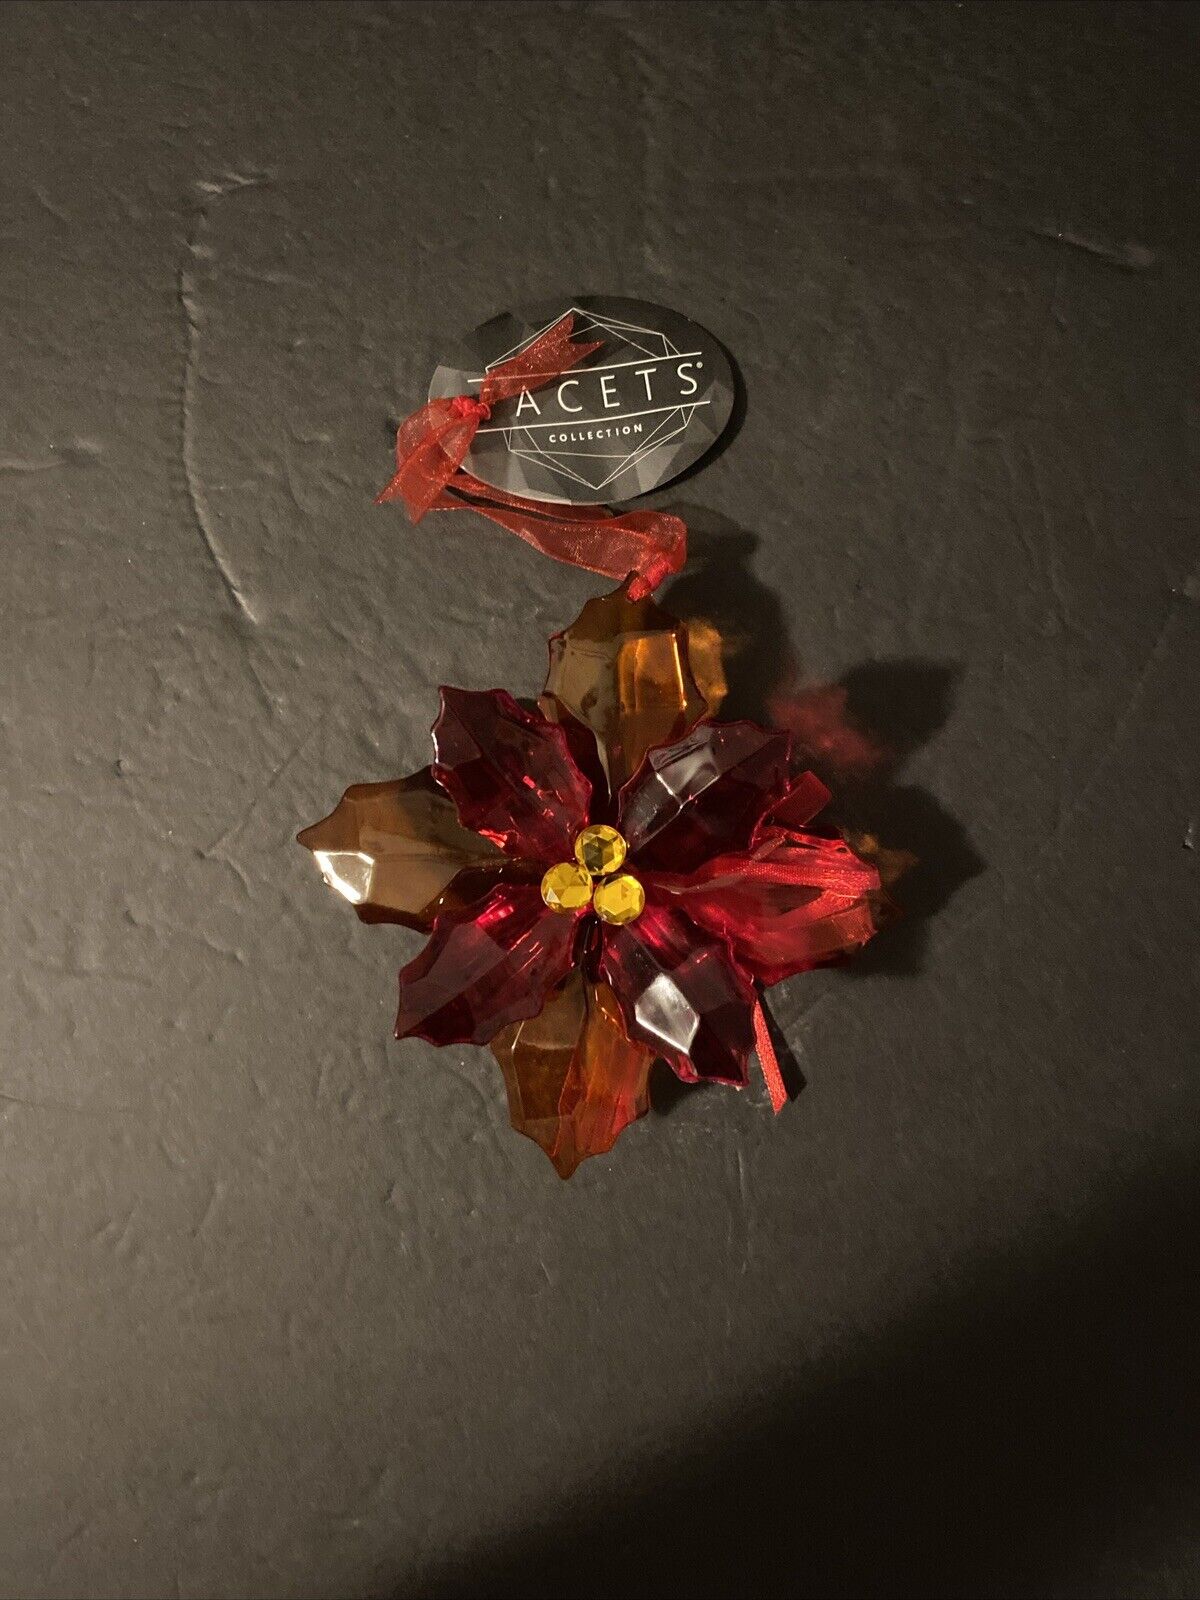 Facets Collection Large Poinsettia Ornament 